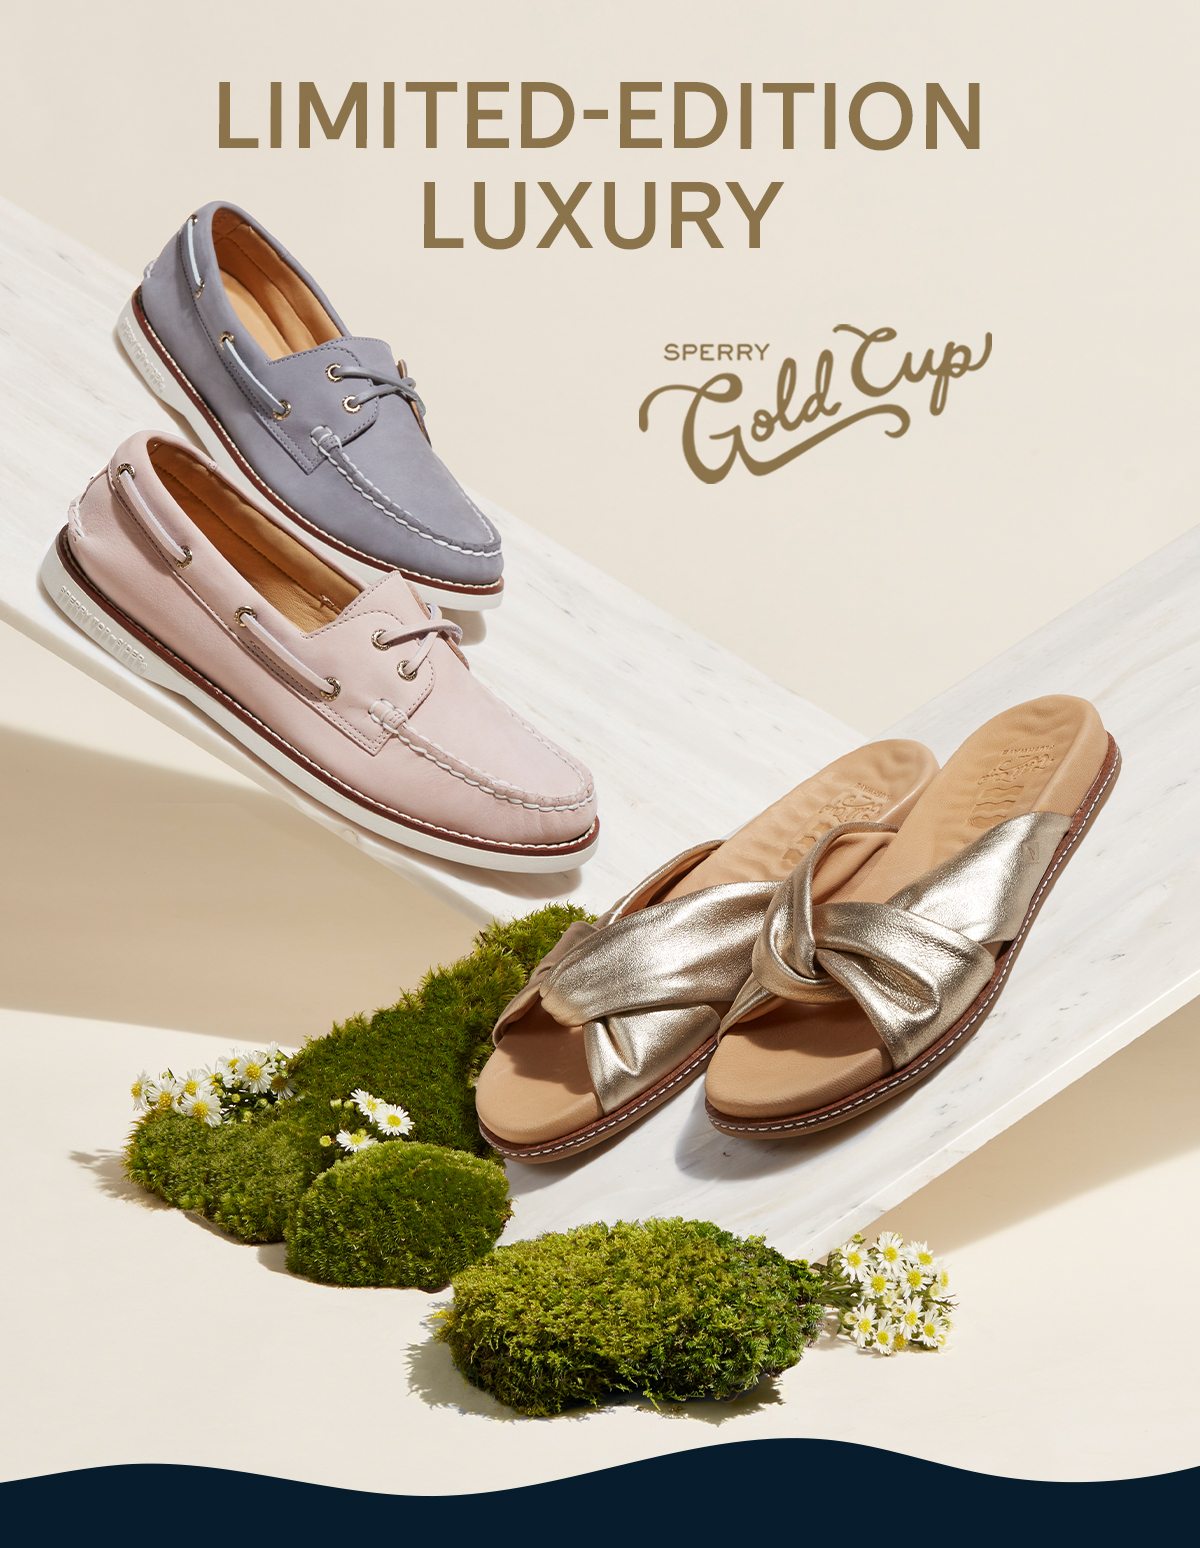 SPERRY - Montana - GOLD CUP - IMG